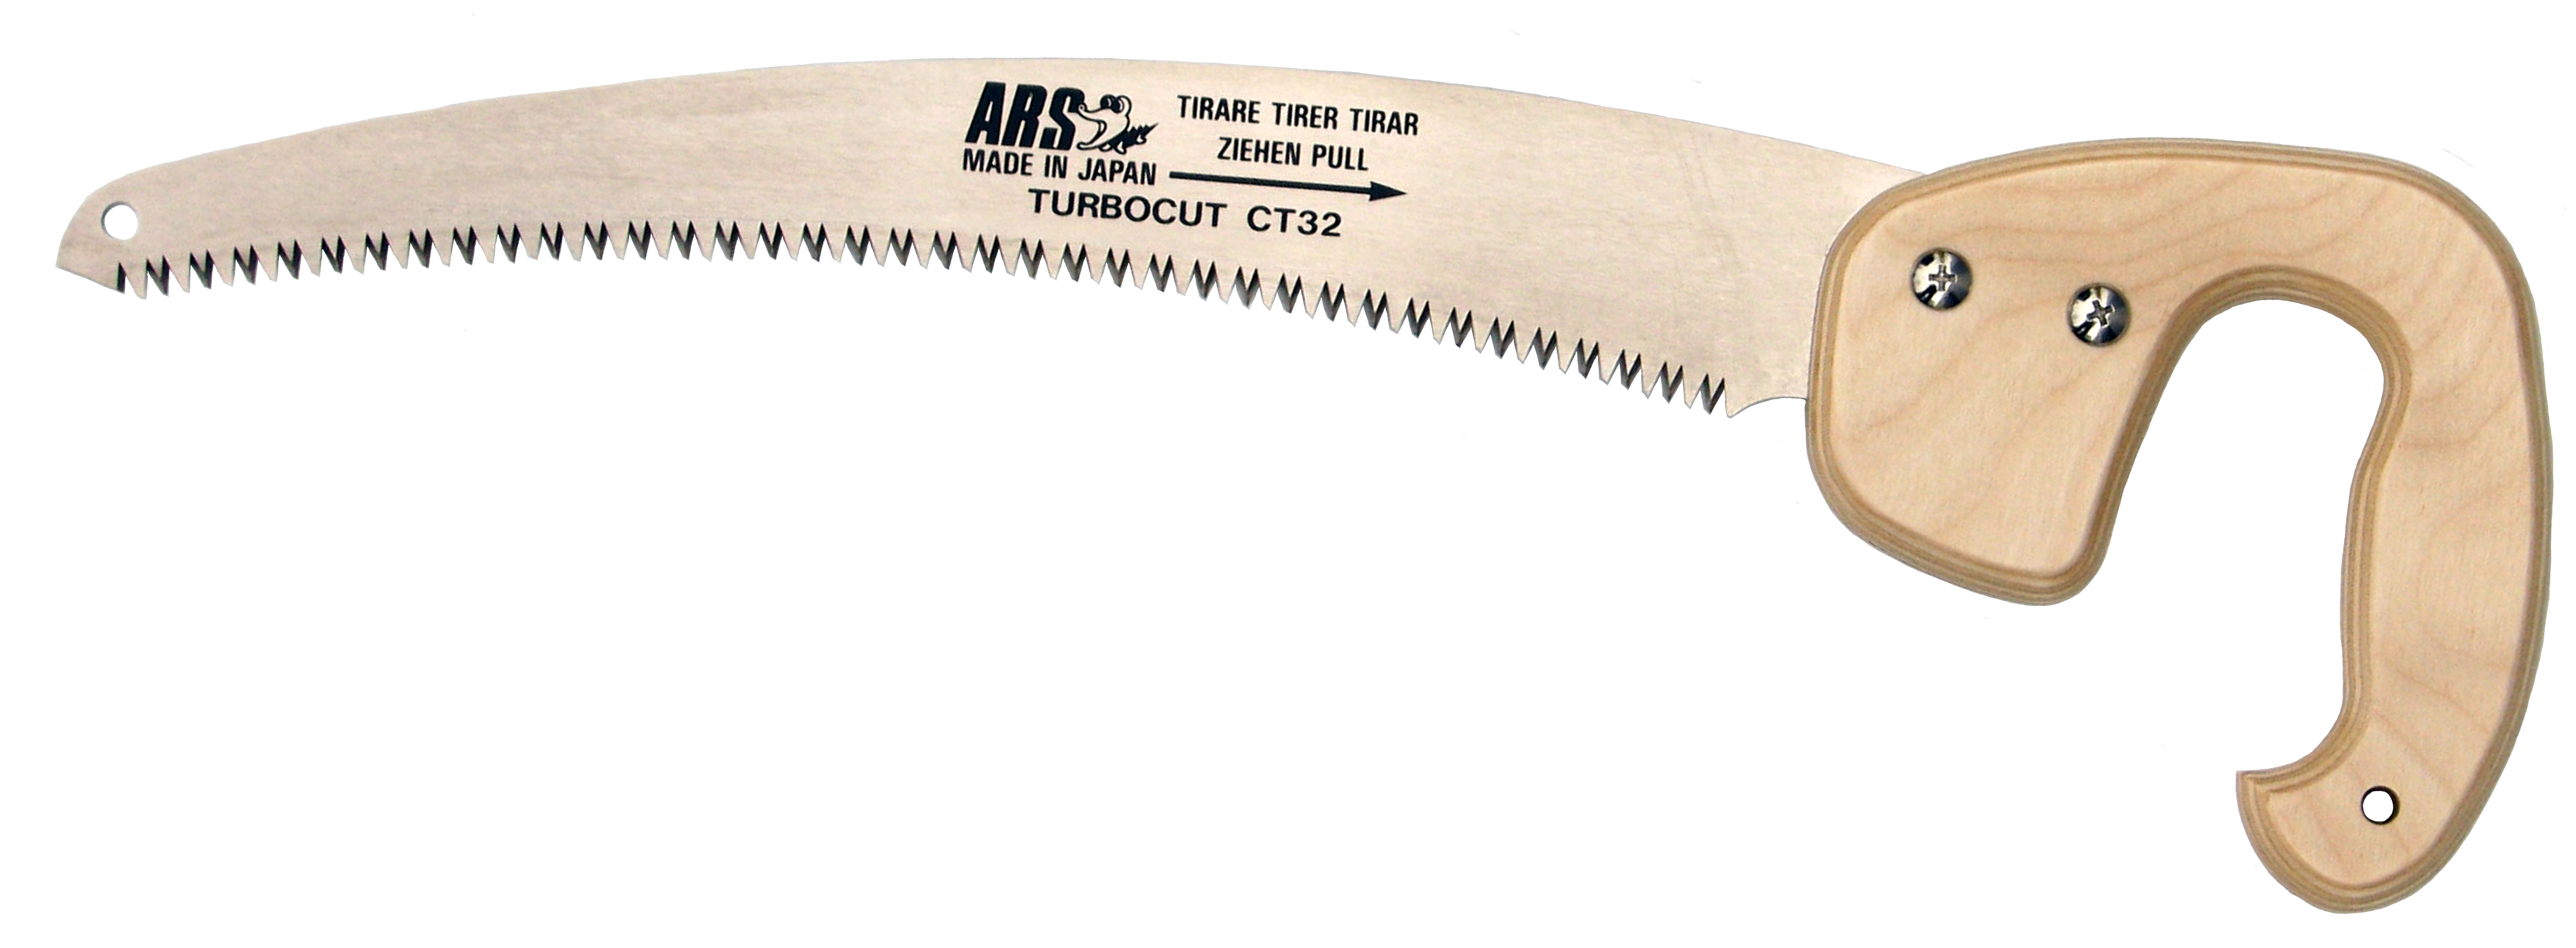 All CT Saws available with UV blades